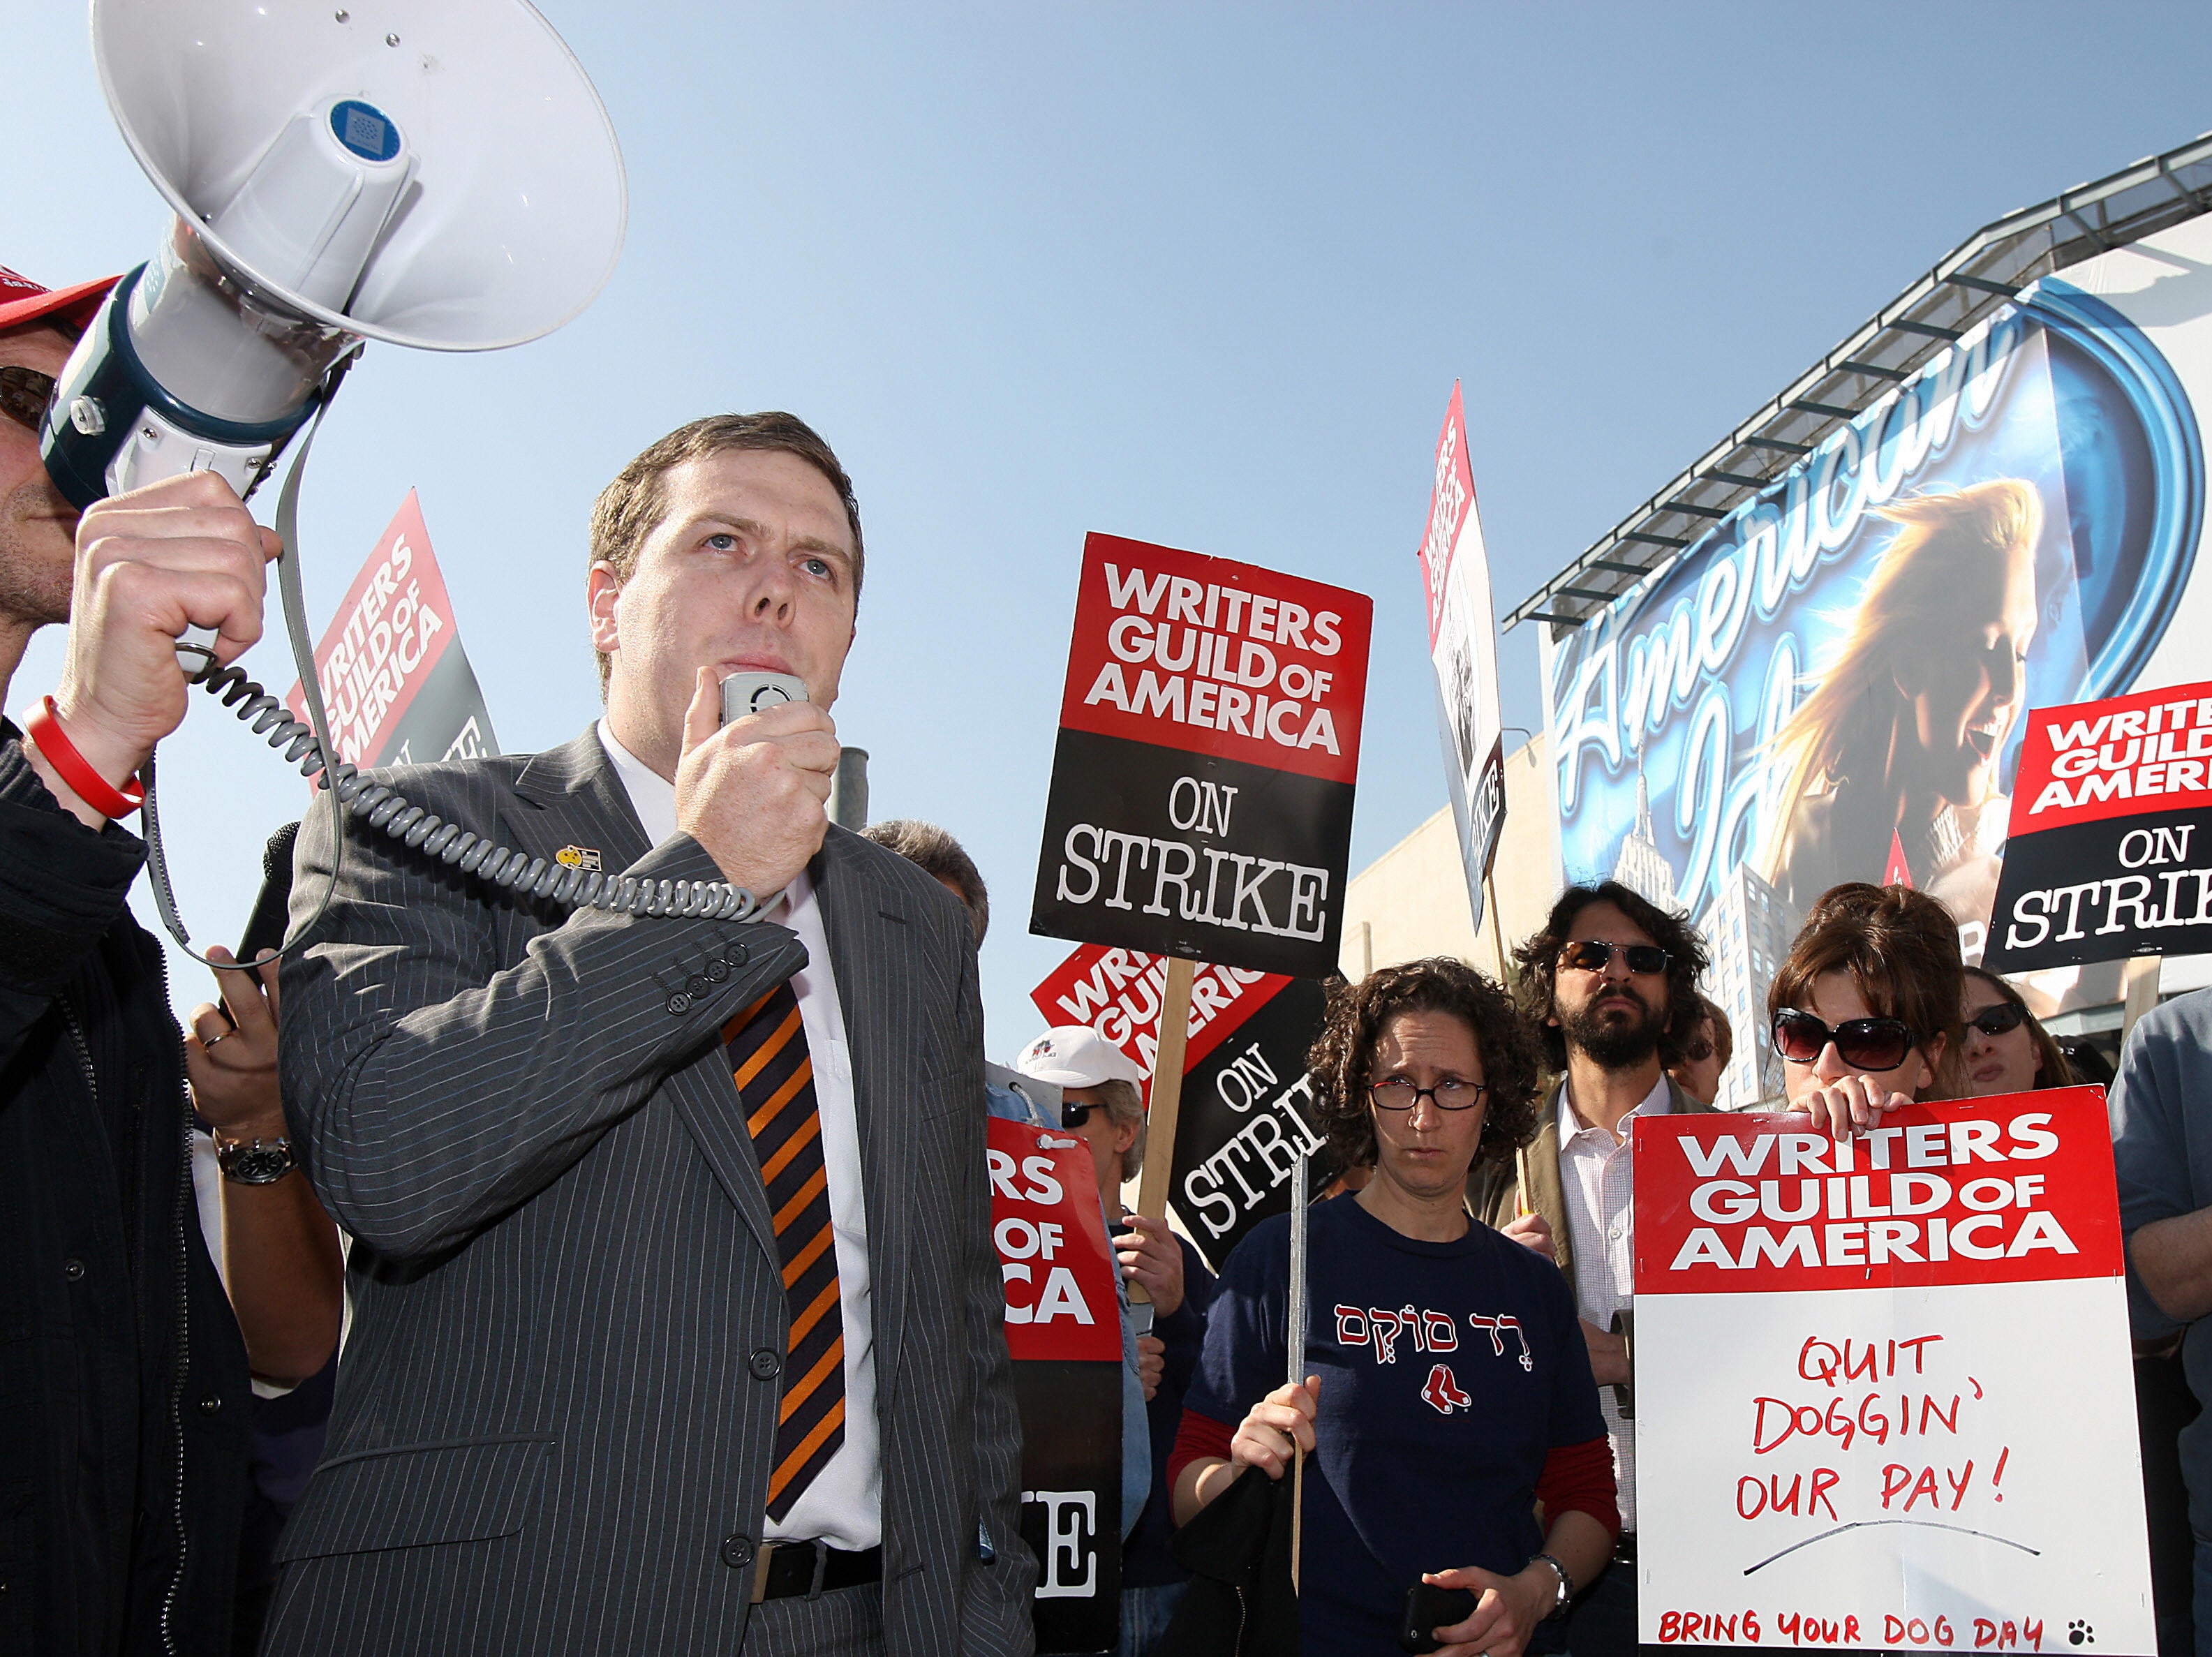 Paul Howes, national secretary of the Australian Workers Union (AWU), addresses striking WGA members on the picket line outside 20th Century Fox Studios in Los Angeles, California, 16 January 2008